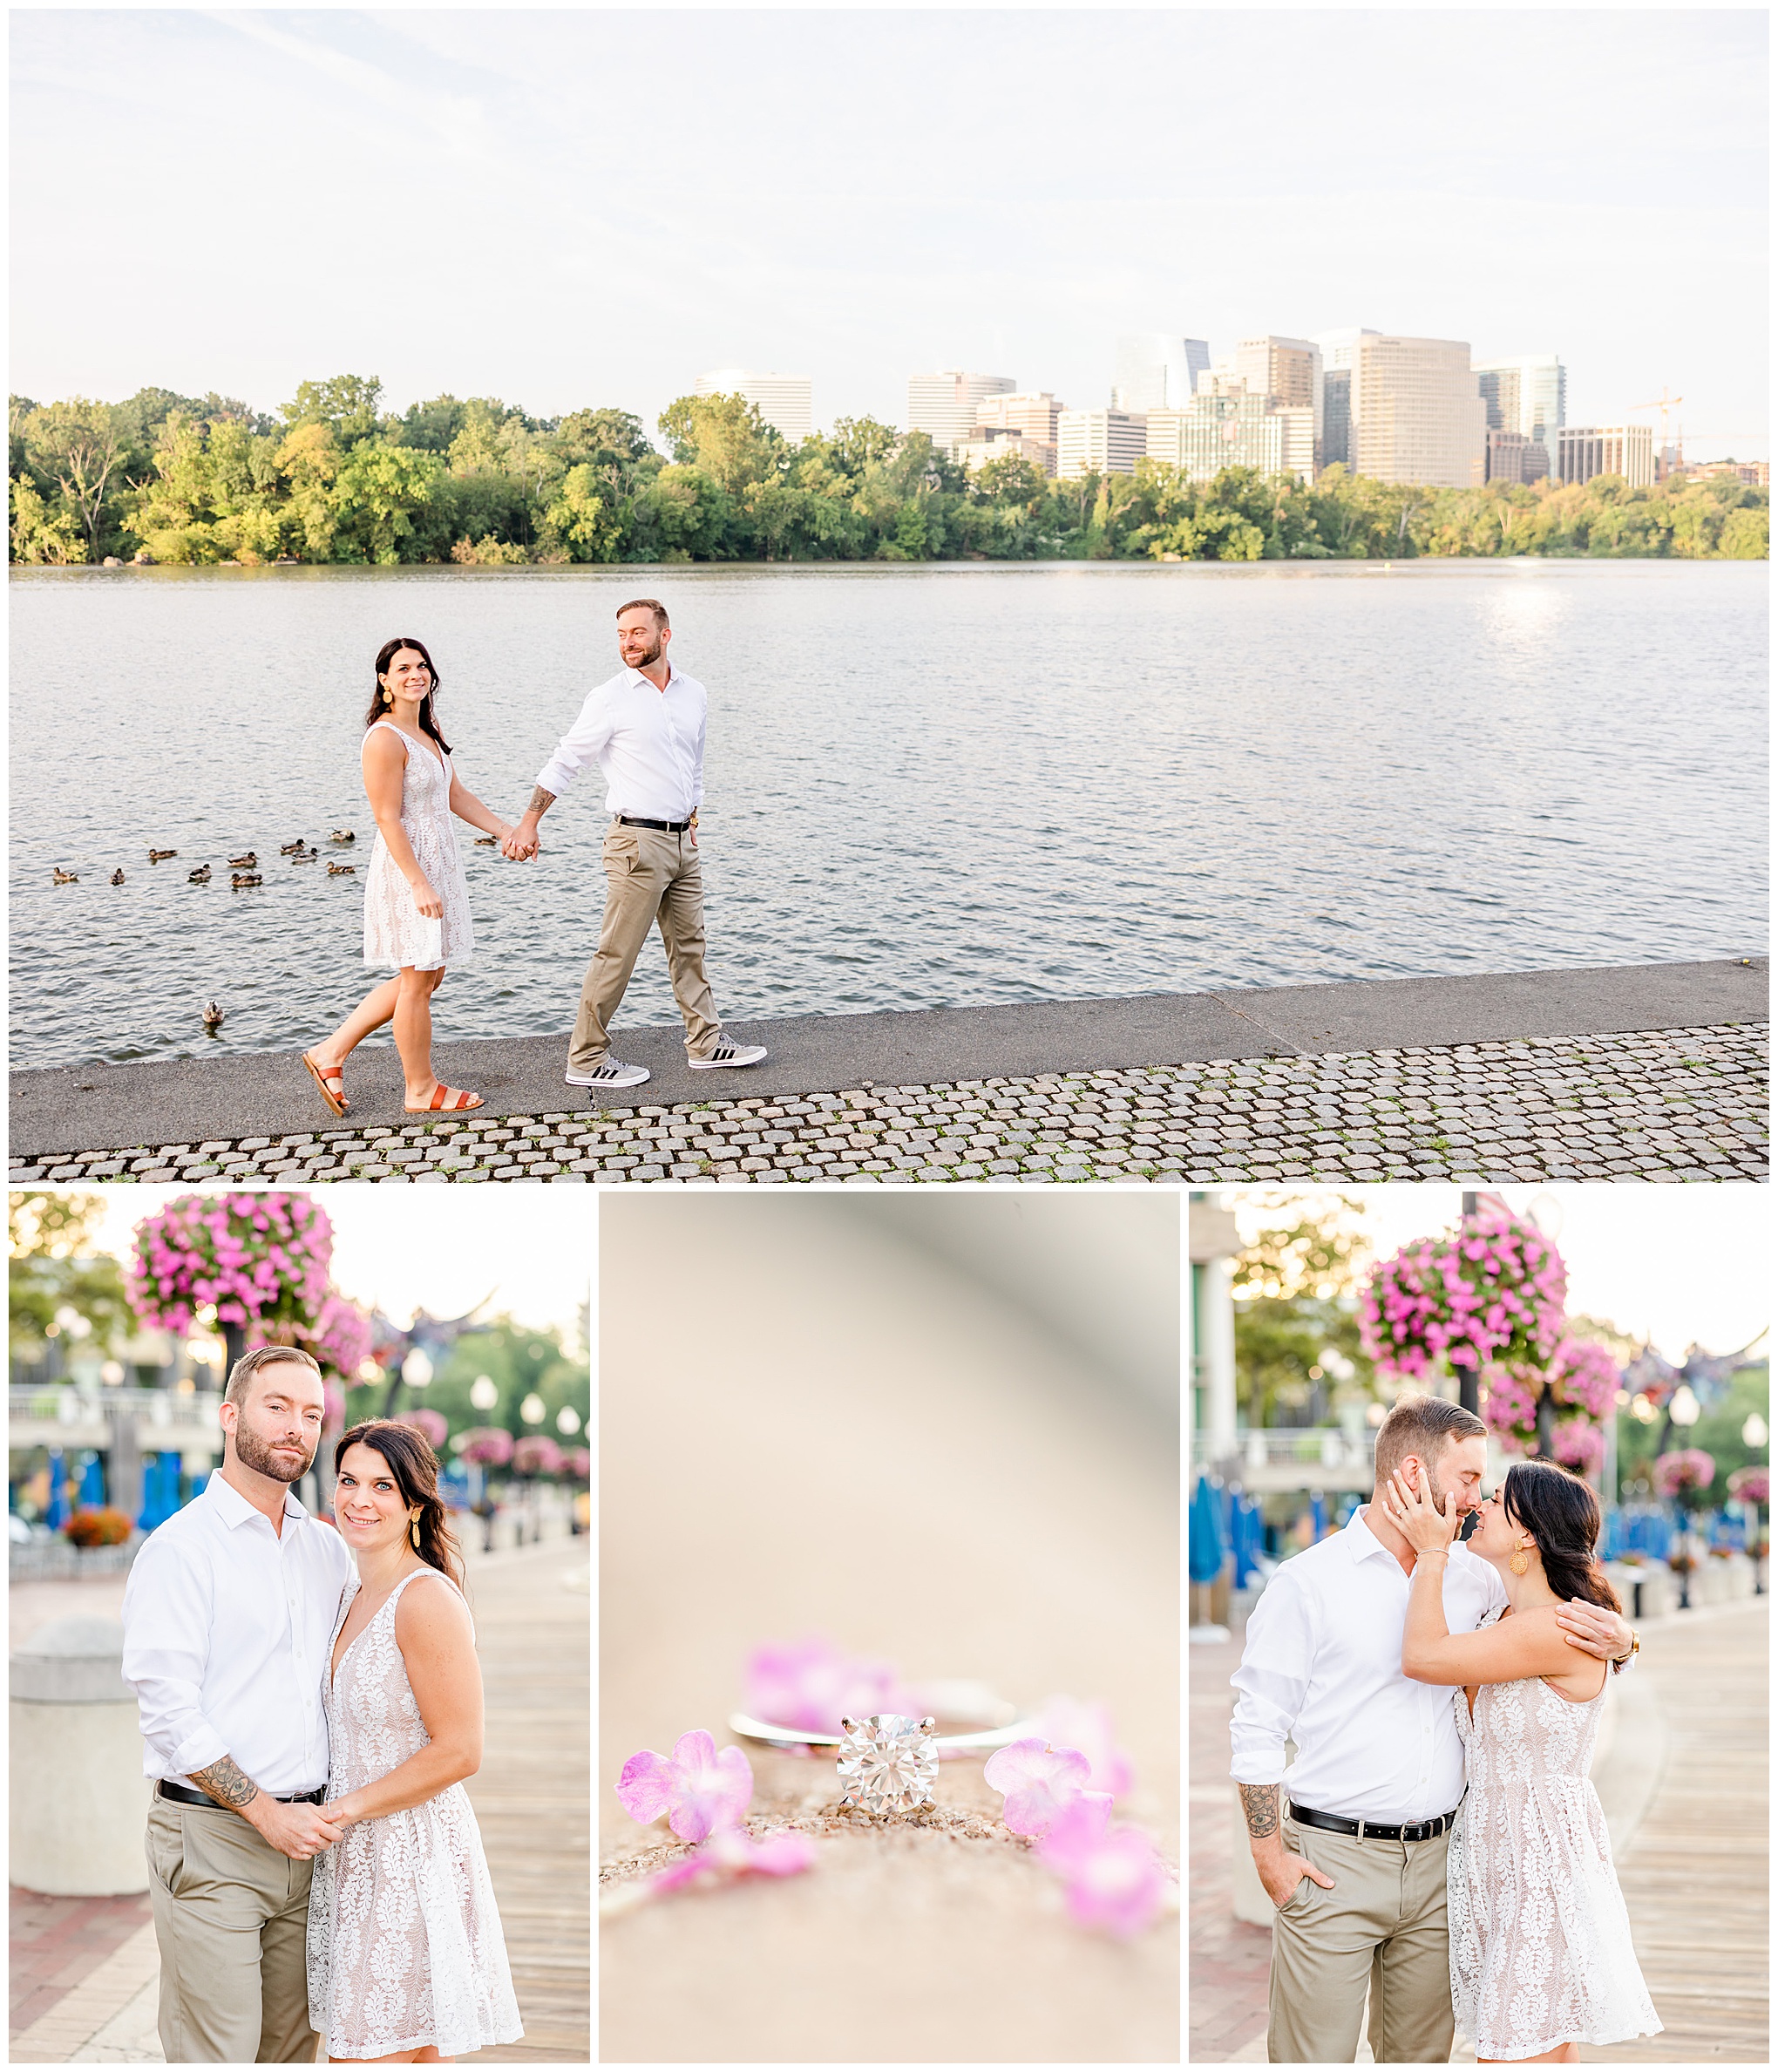 Georgetown waterfront engagement session, Georgetown engagement photos, Georgetown wedding photographer, DC wedding photographer, waterfront engagement photos, Georgetown waterfront engagement photos, DC engagement photos, Rachel E.H. Photography, summer engagement photos, couple holding hands from a distance, couple smiling, engagement ring surrounded by pink flowers